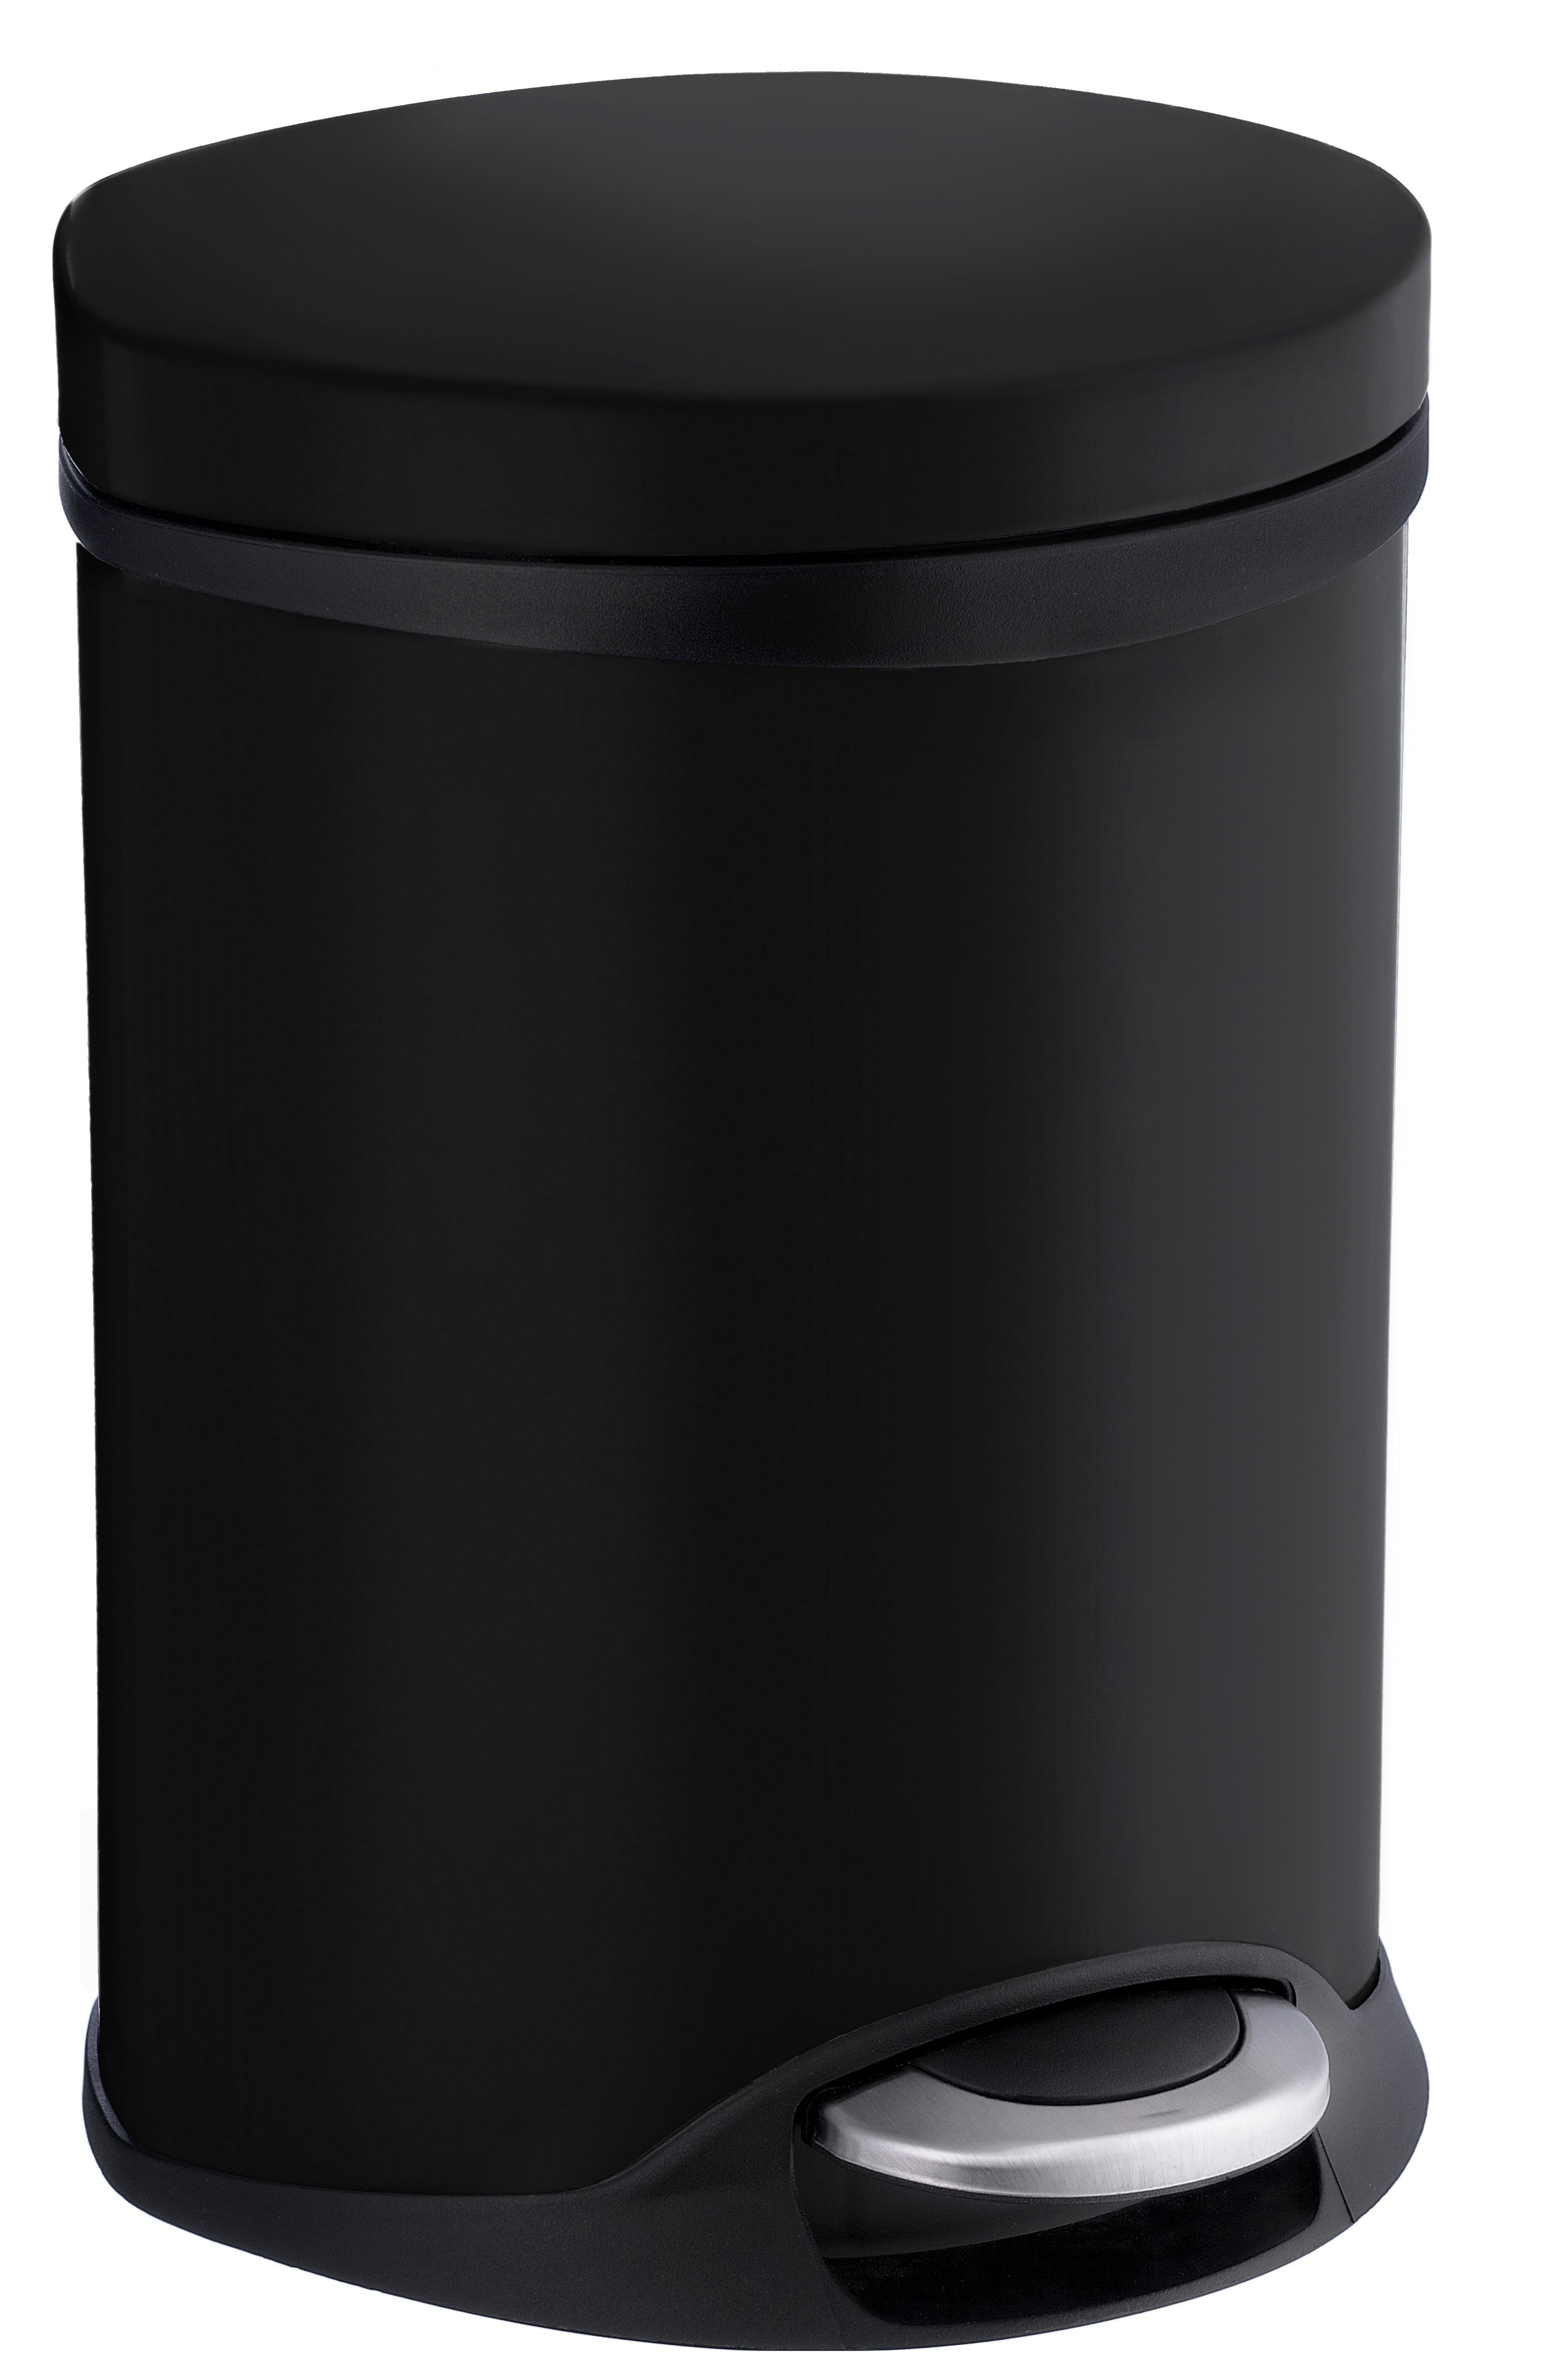 black lacquered stainless steel pedal bin